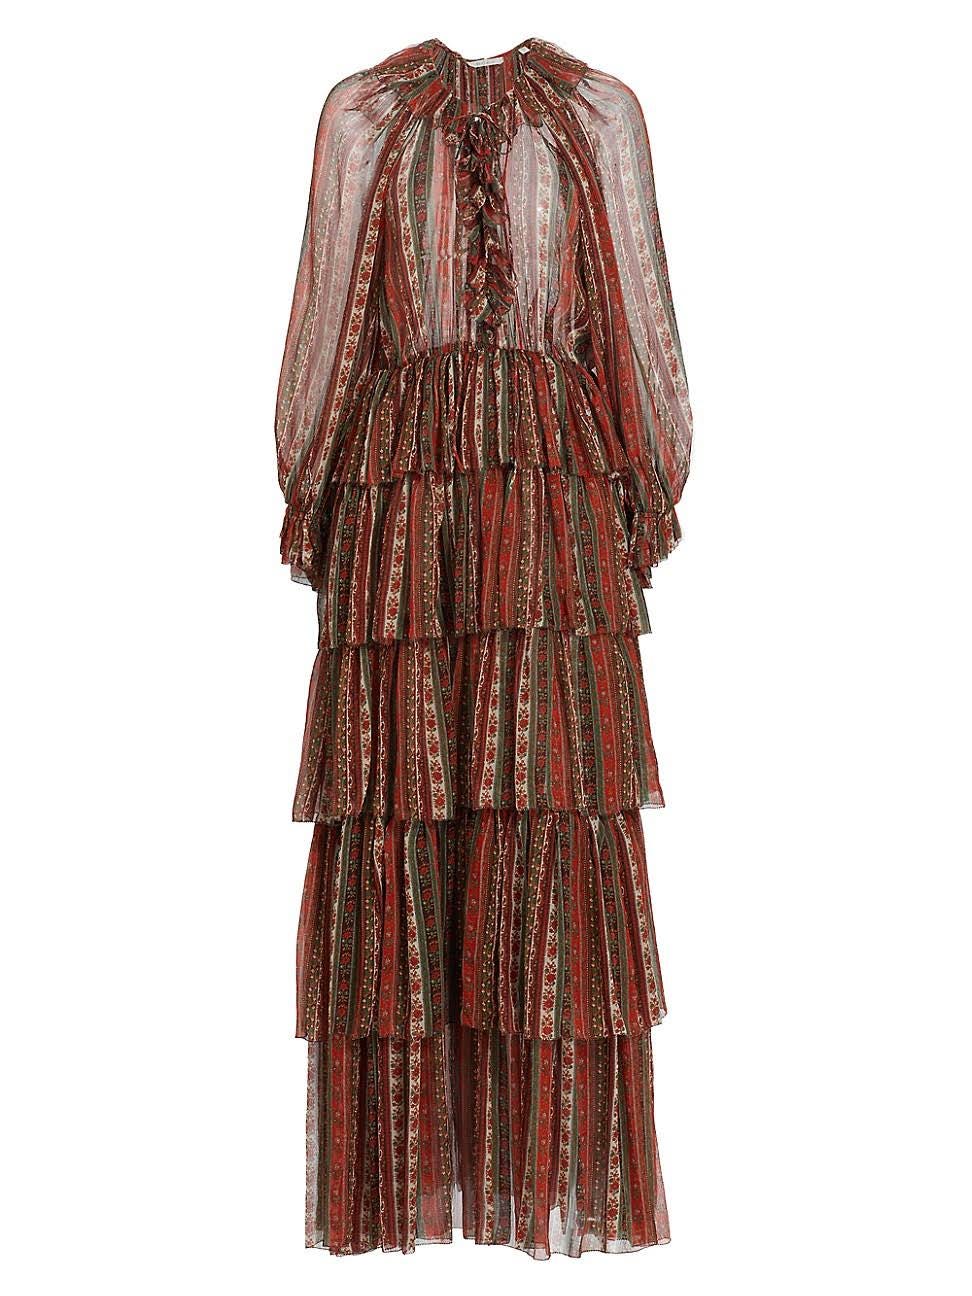 Stylish DÔEN Silk Maxi Dress with Fluttery Tiers and Elongating Effect | Image